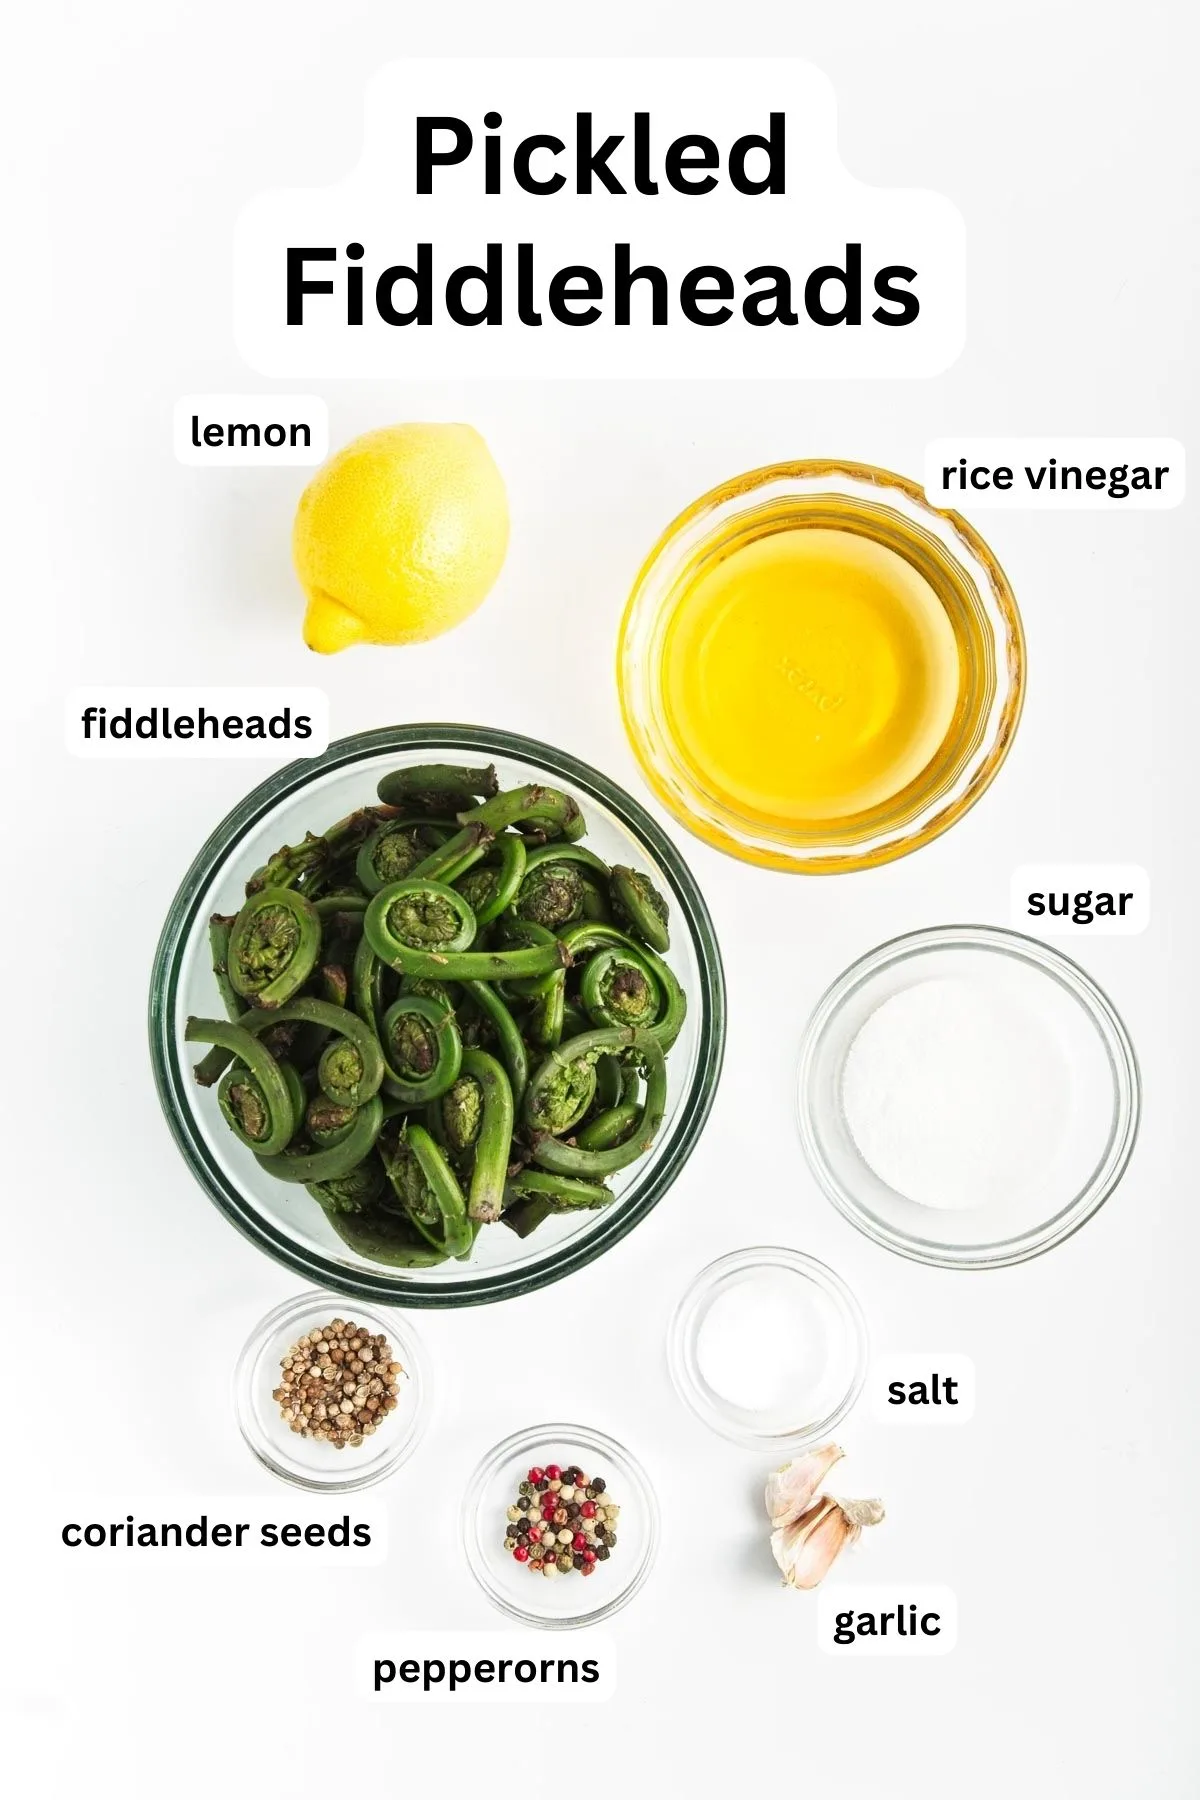 Ingredients to make pickled fiddleheads